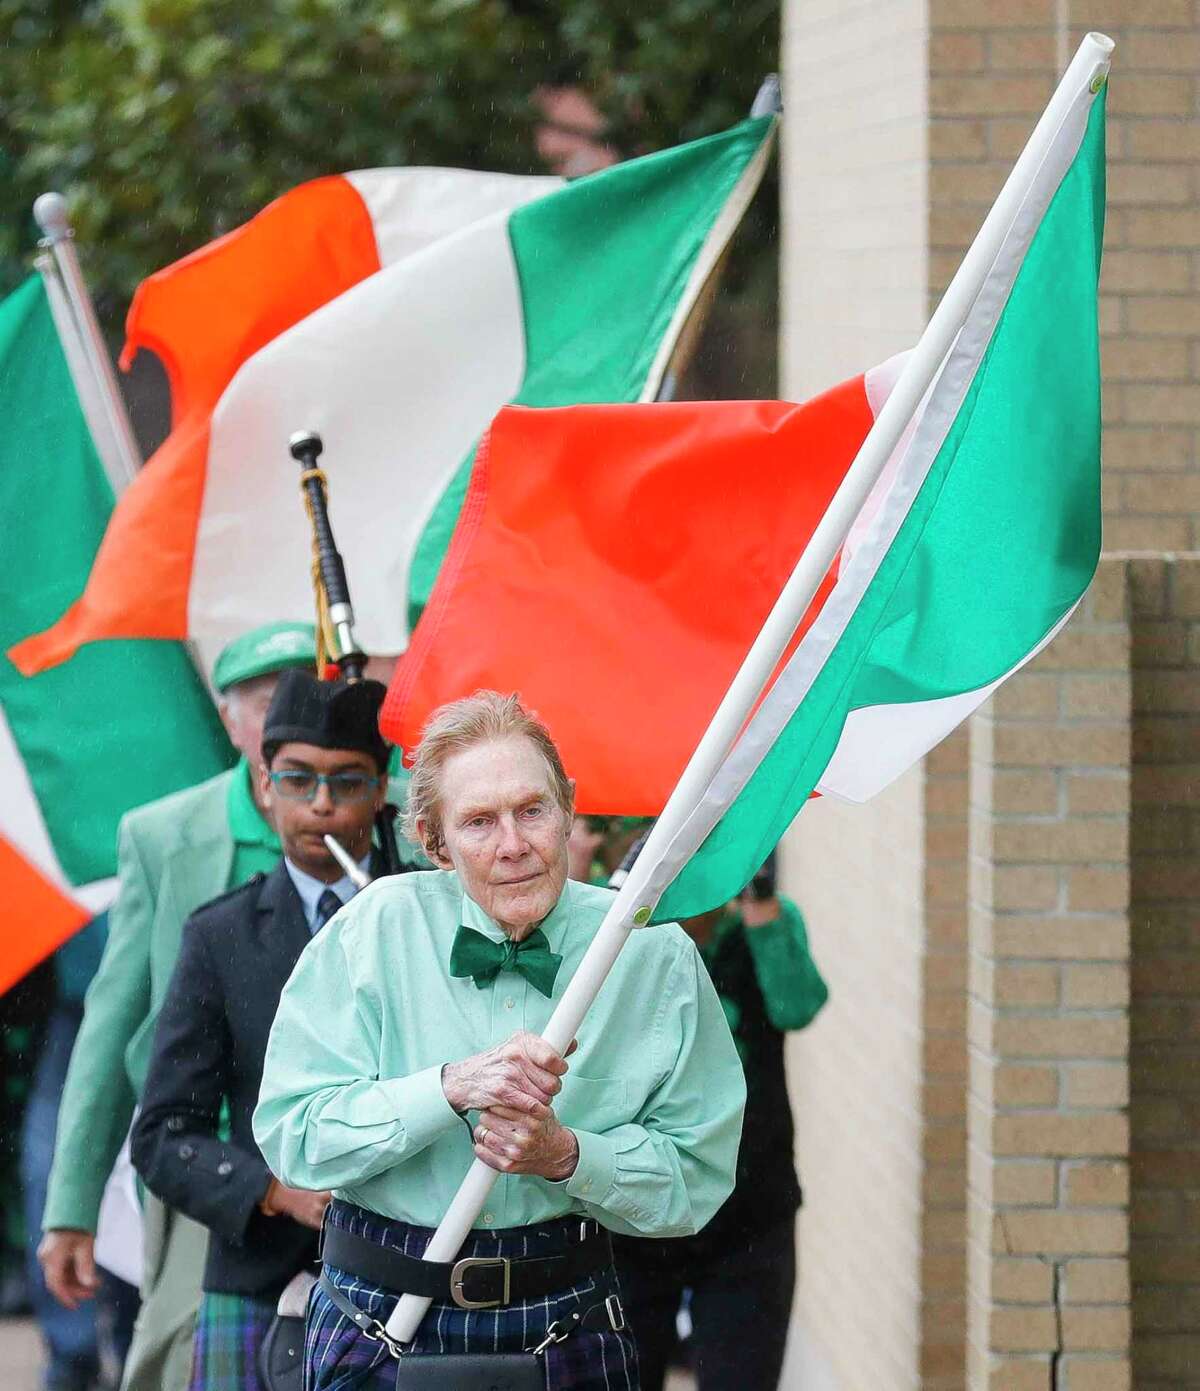 Michael McDougal carries an Irish flag as he leads the annual St. Patrick’s Day walking parade through downtown Conroe, Thursday, March 17, 2022, in Conroe.